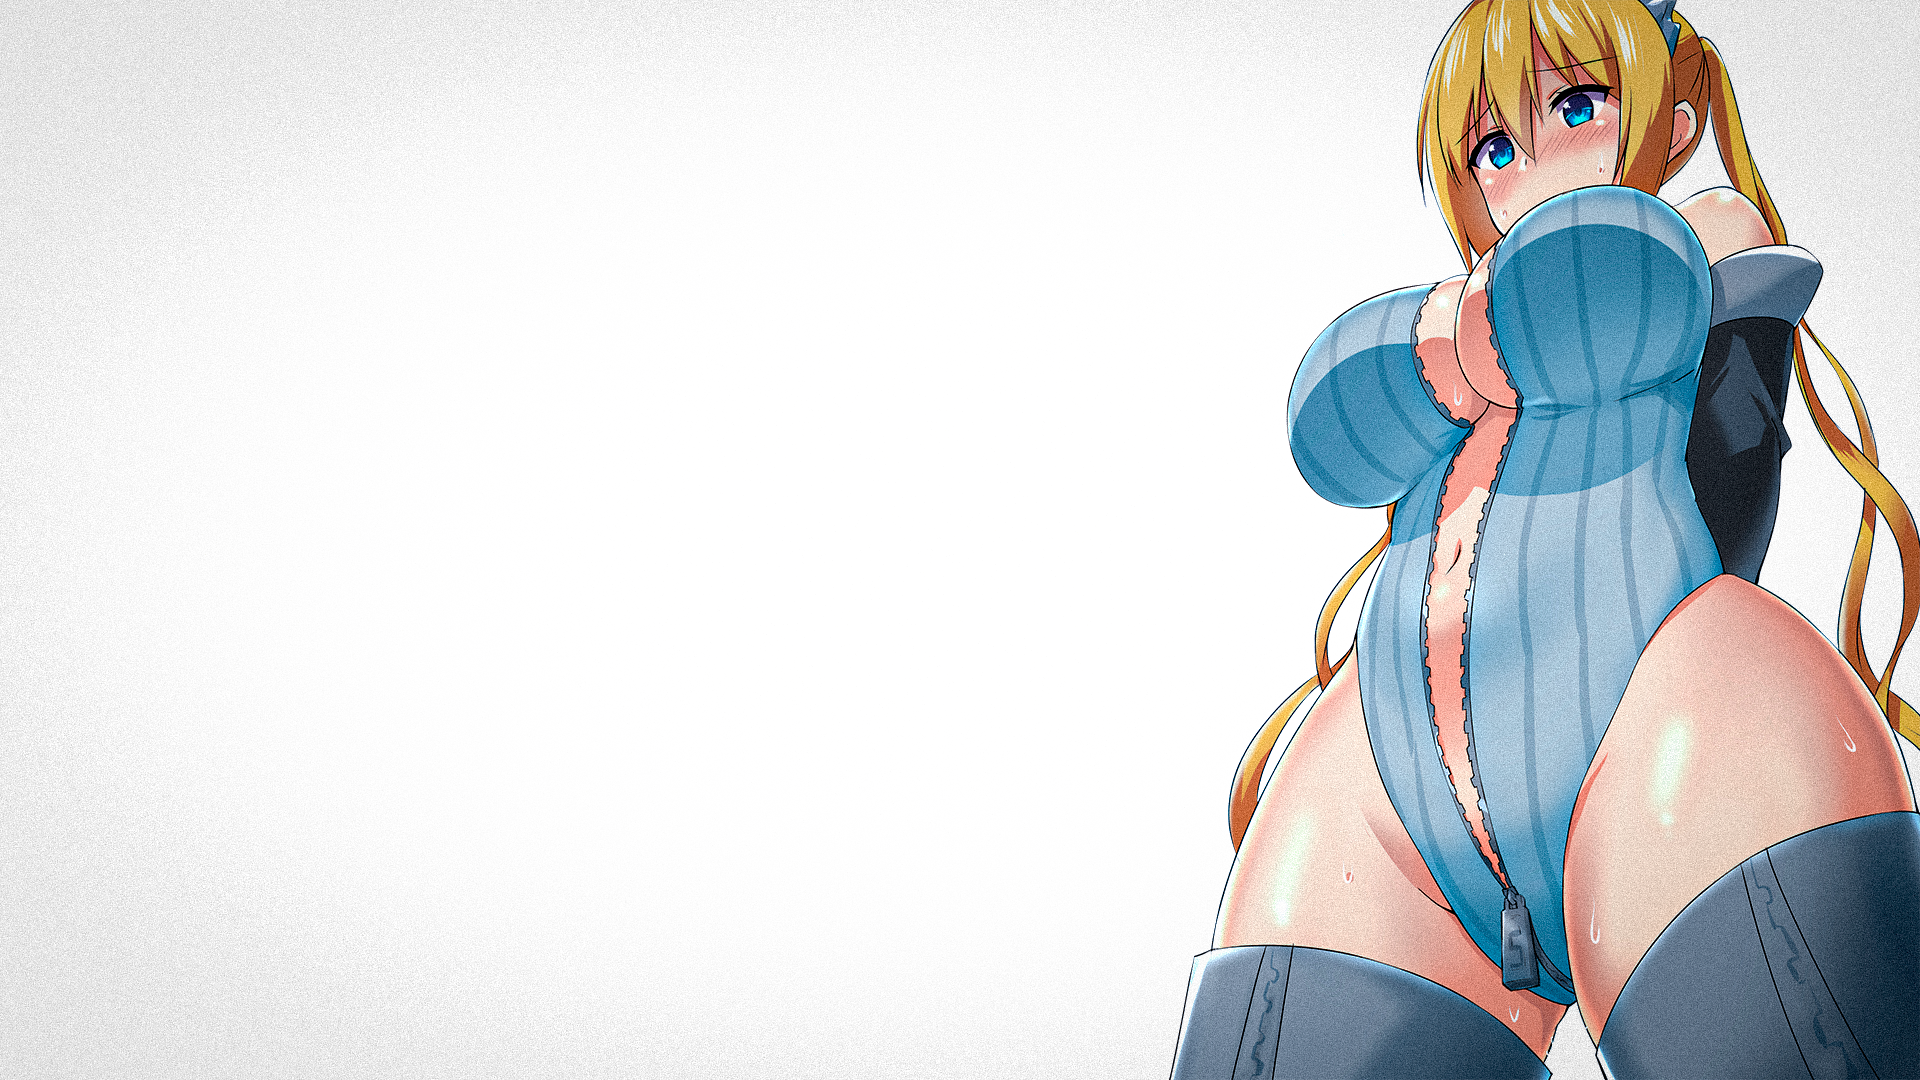 Anime 1920x1080 anime anime girls Hinata Kaho big boobs underboob leotard thigh-highs no bra BLEND-S low-angle unzipped looking below embarrassed ponytail arm(s) behind back white background bright